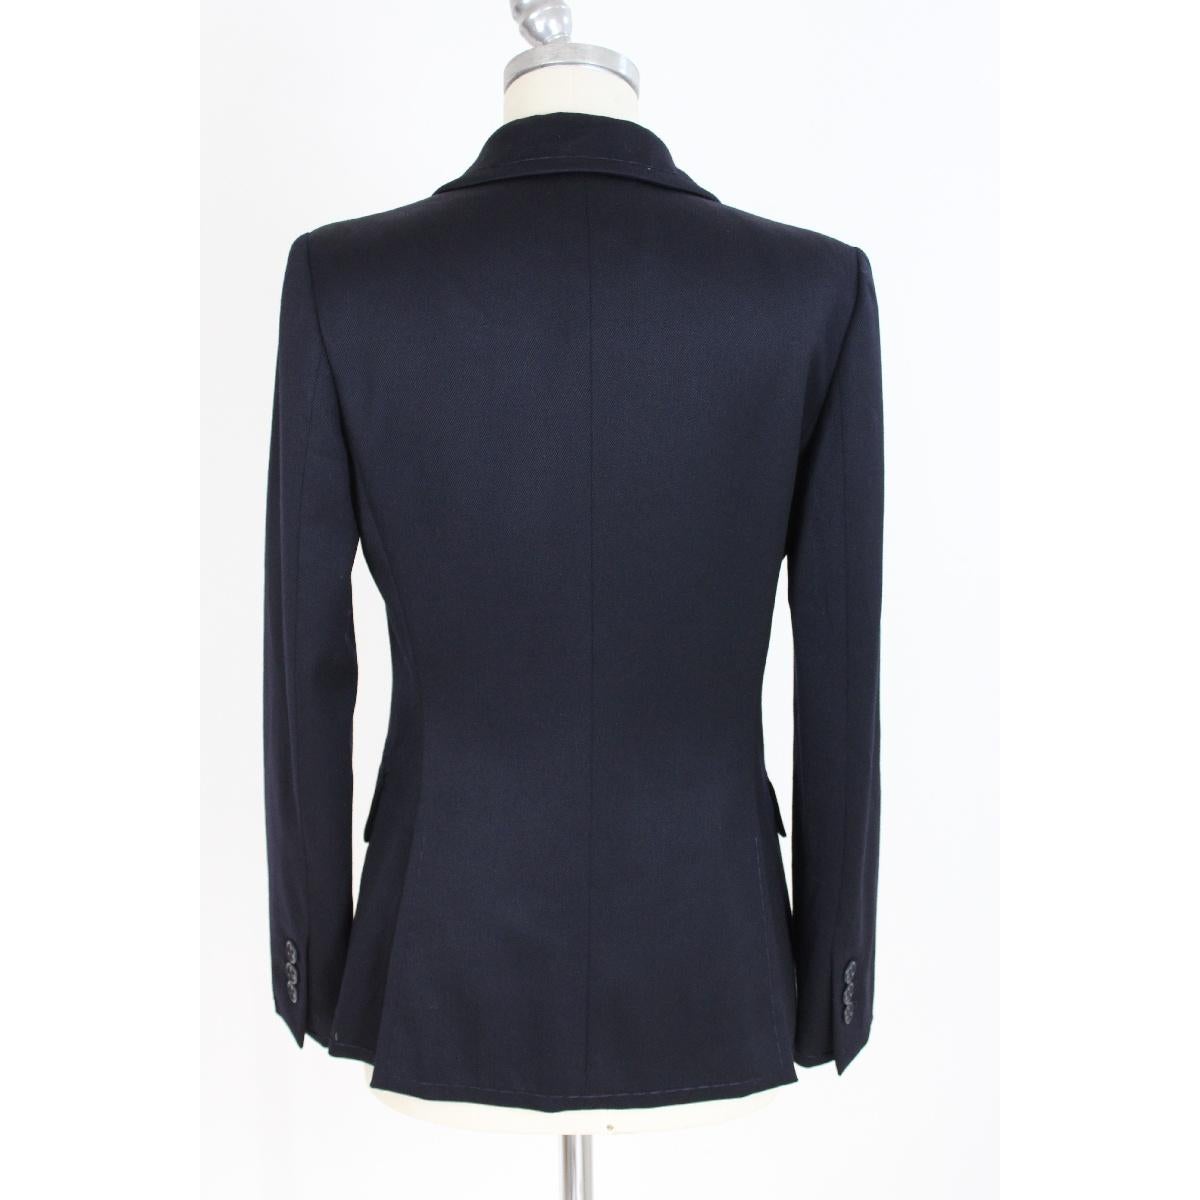 Iceberg 90s vintage women's jacket. Dark blue double-breasted jacket, 98% wool, 2% elastane fabric. Made in Italy. Excellent vintage condition

SIZE 42 IT 8 US 10 UK

Shoulders: 42 cm
Length: 75 cm
Bust / chest: 46 cm
Sleeves: 60 cm